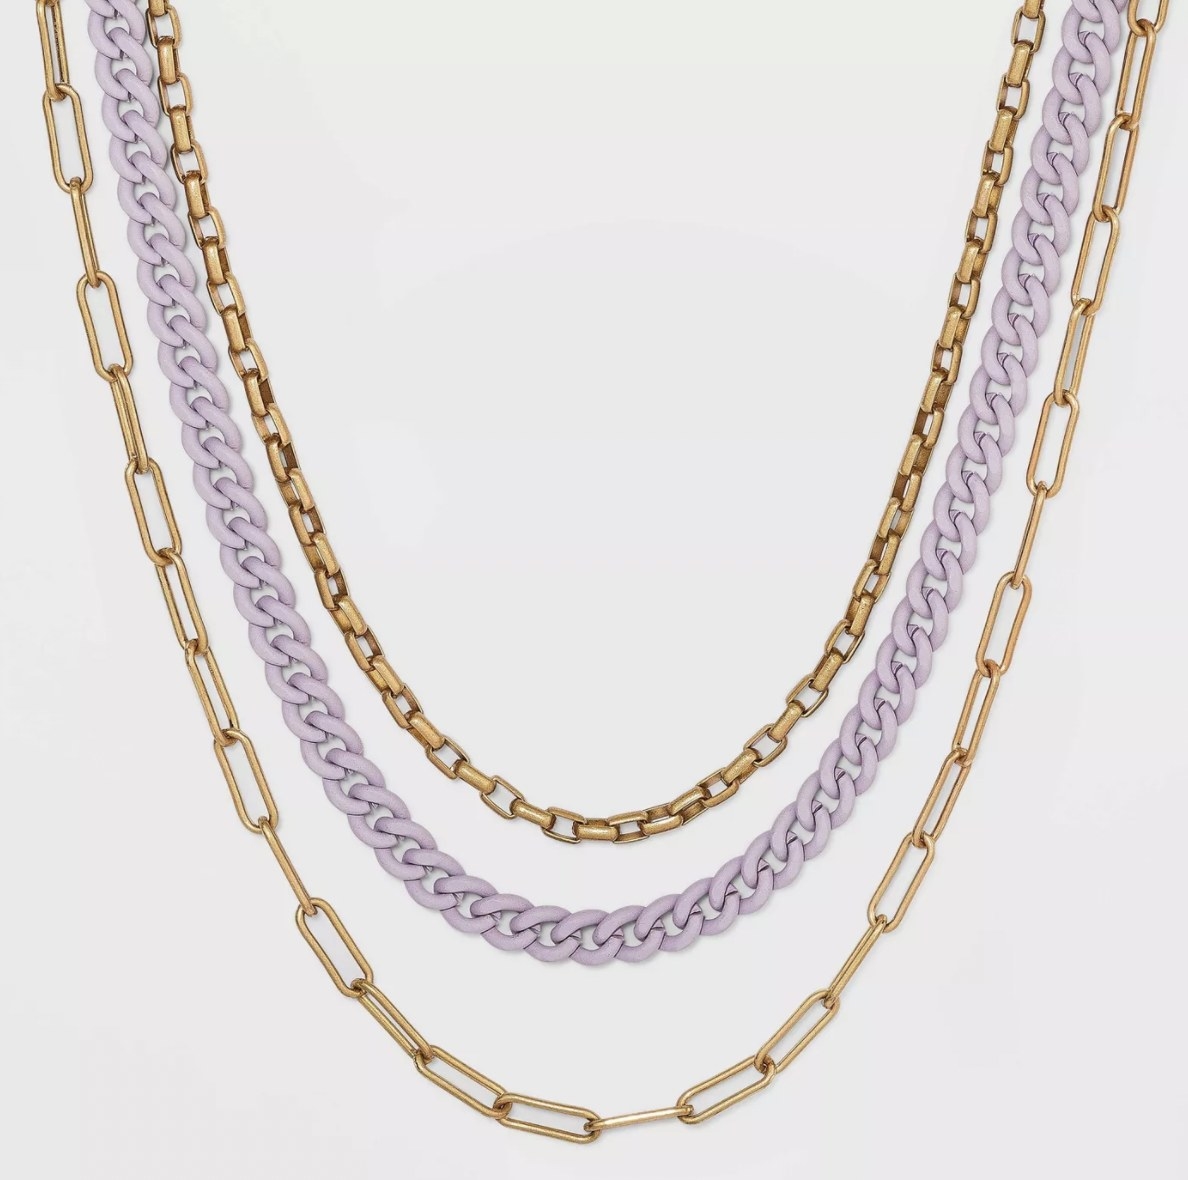 the necklace with two gold chains and one purple chain